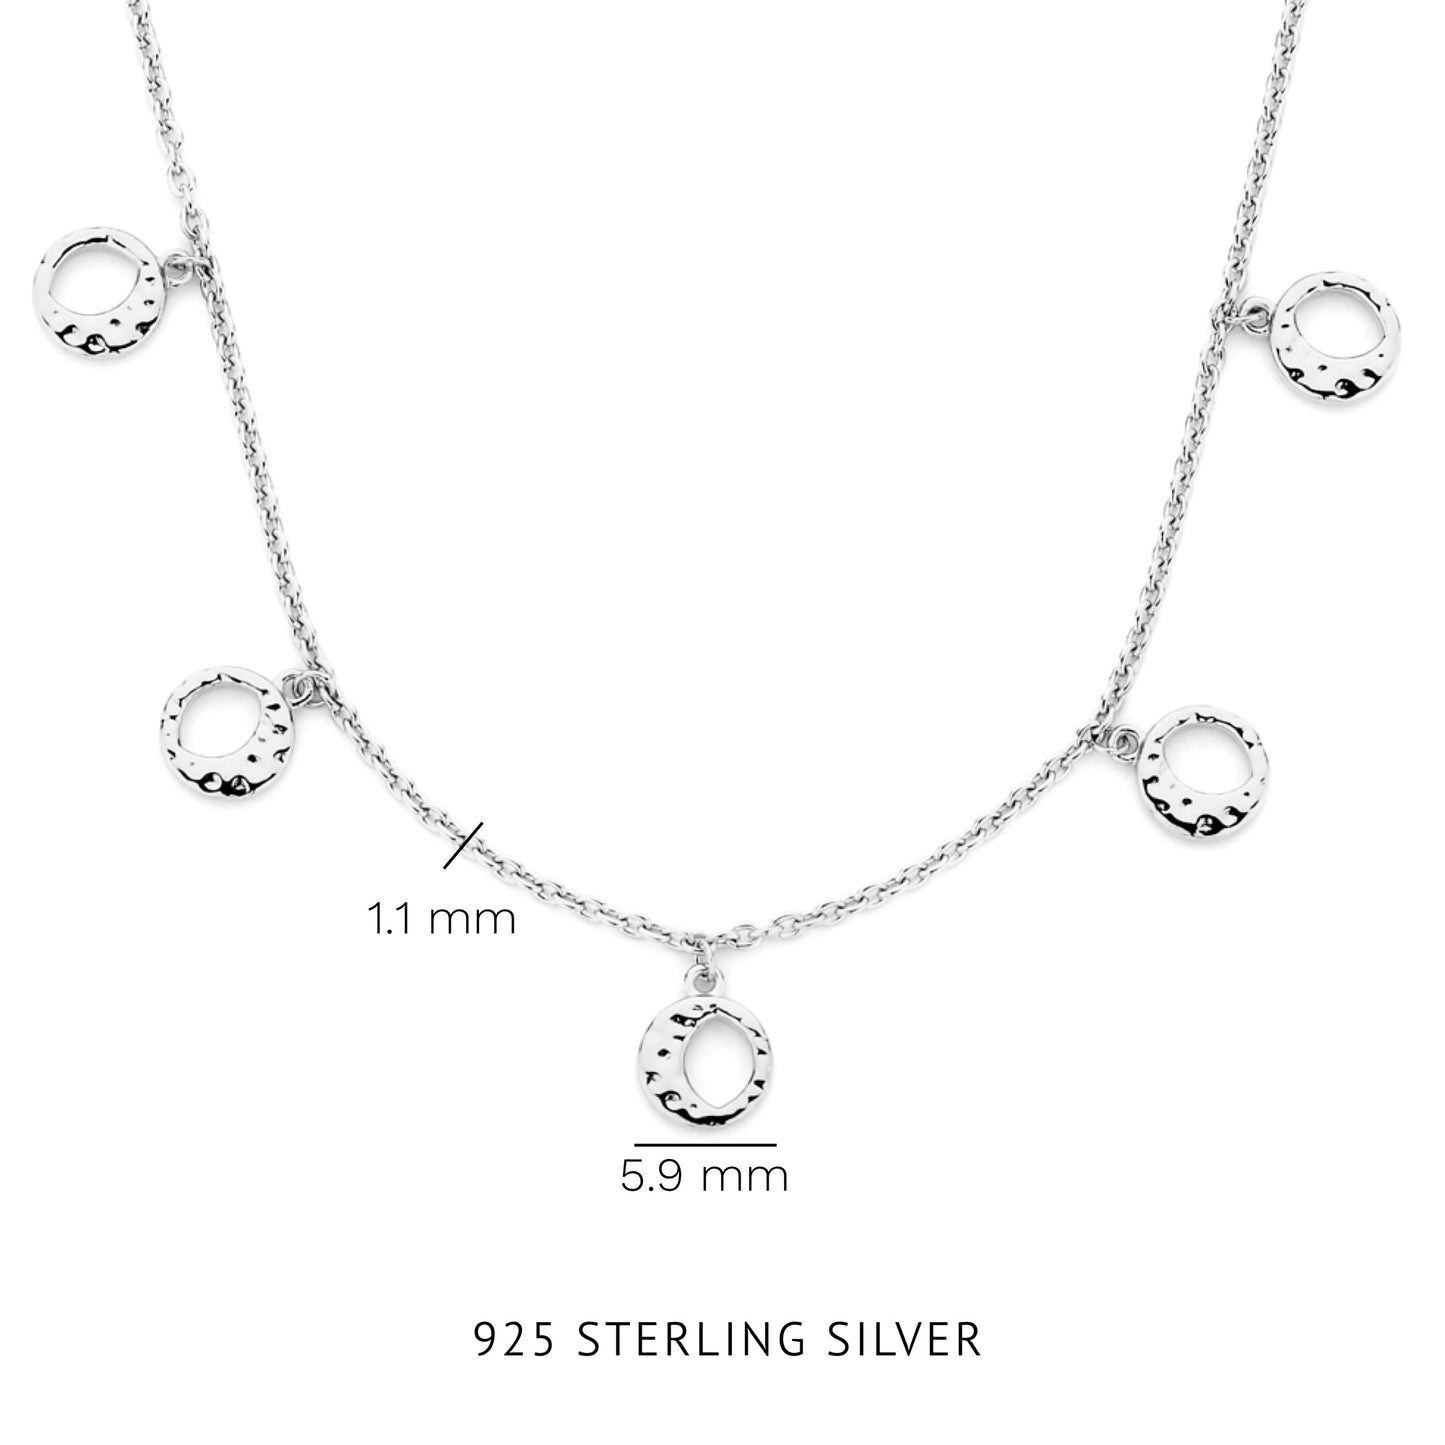 Luna 925 sterling silver necklace with moons